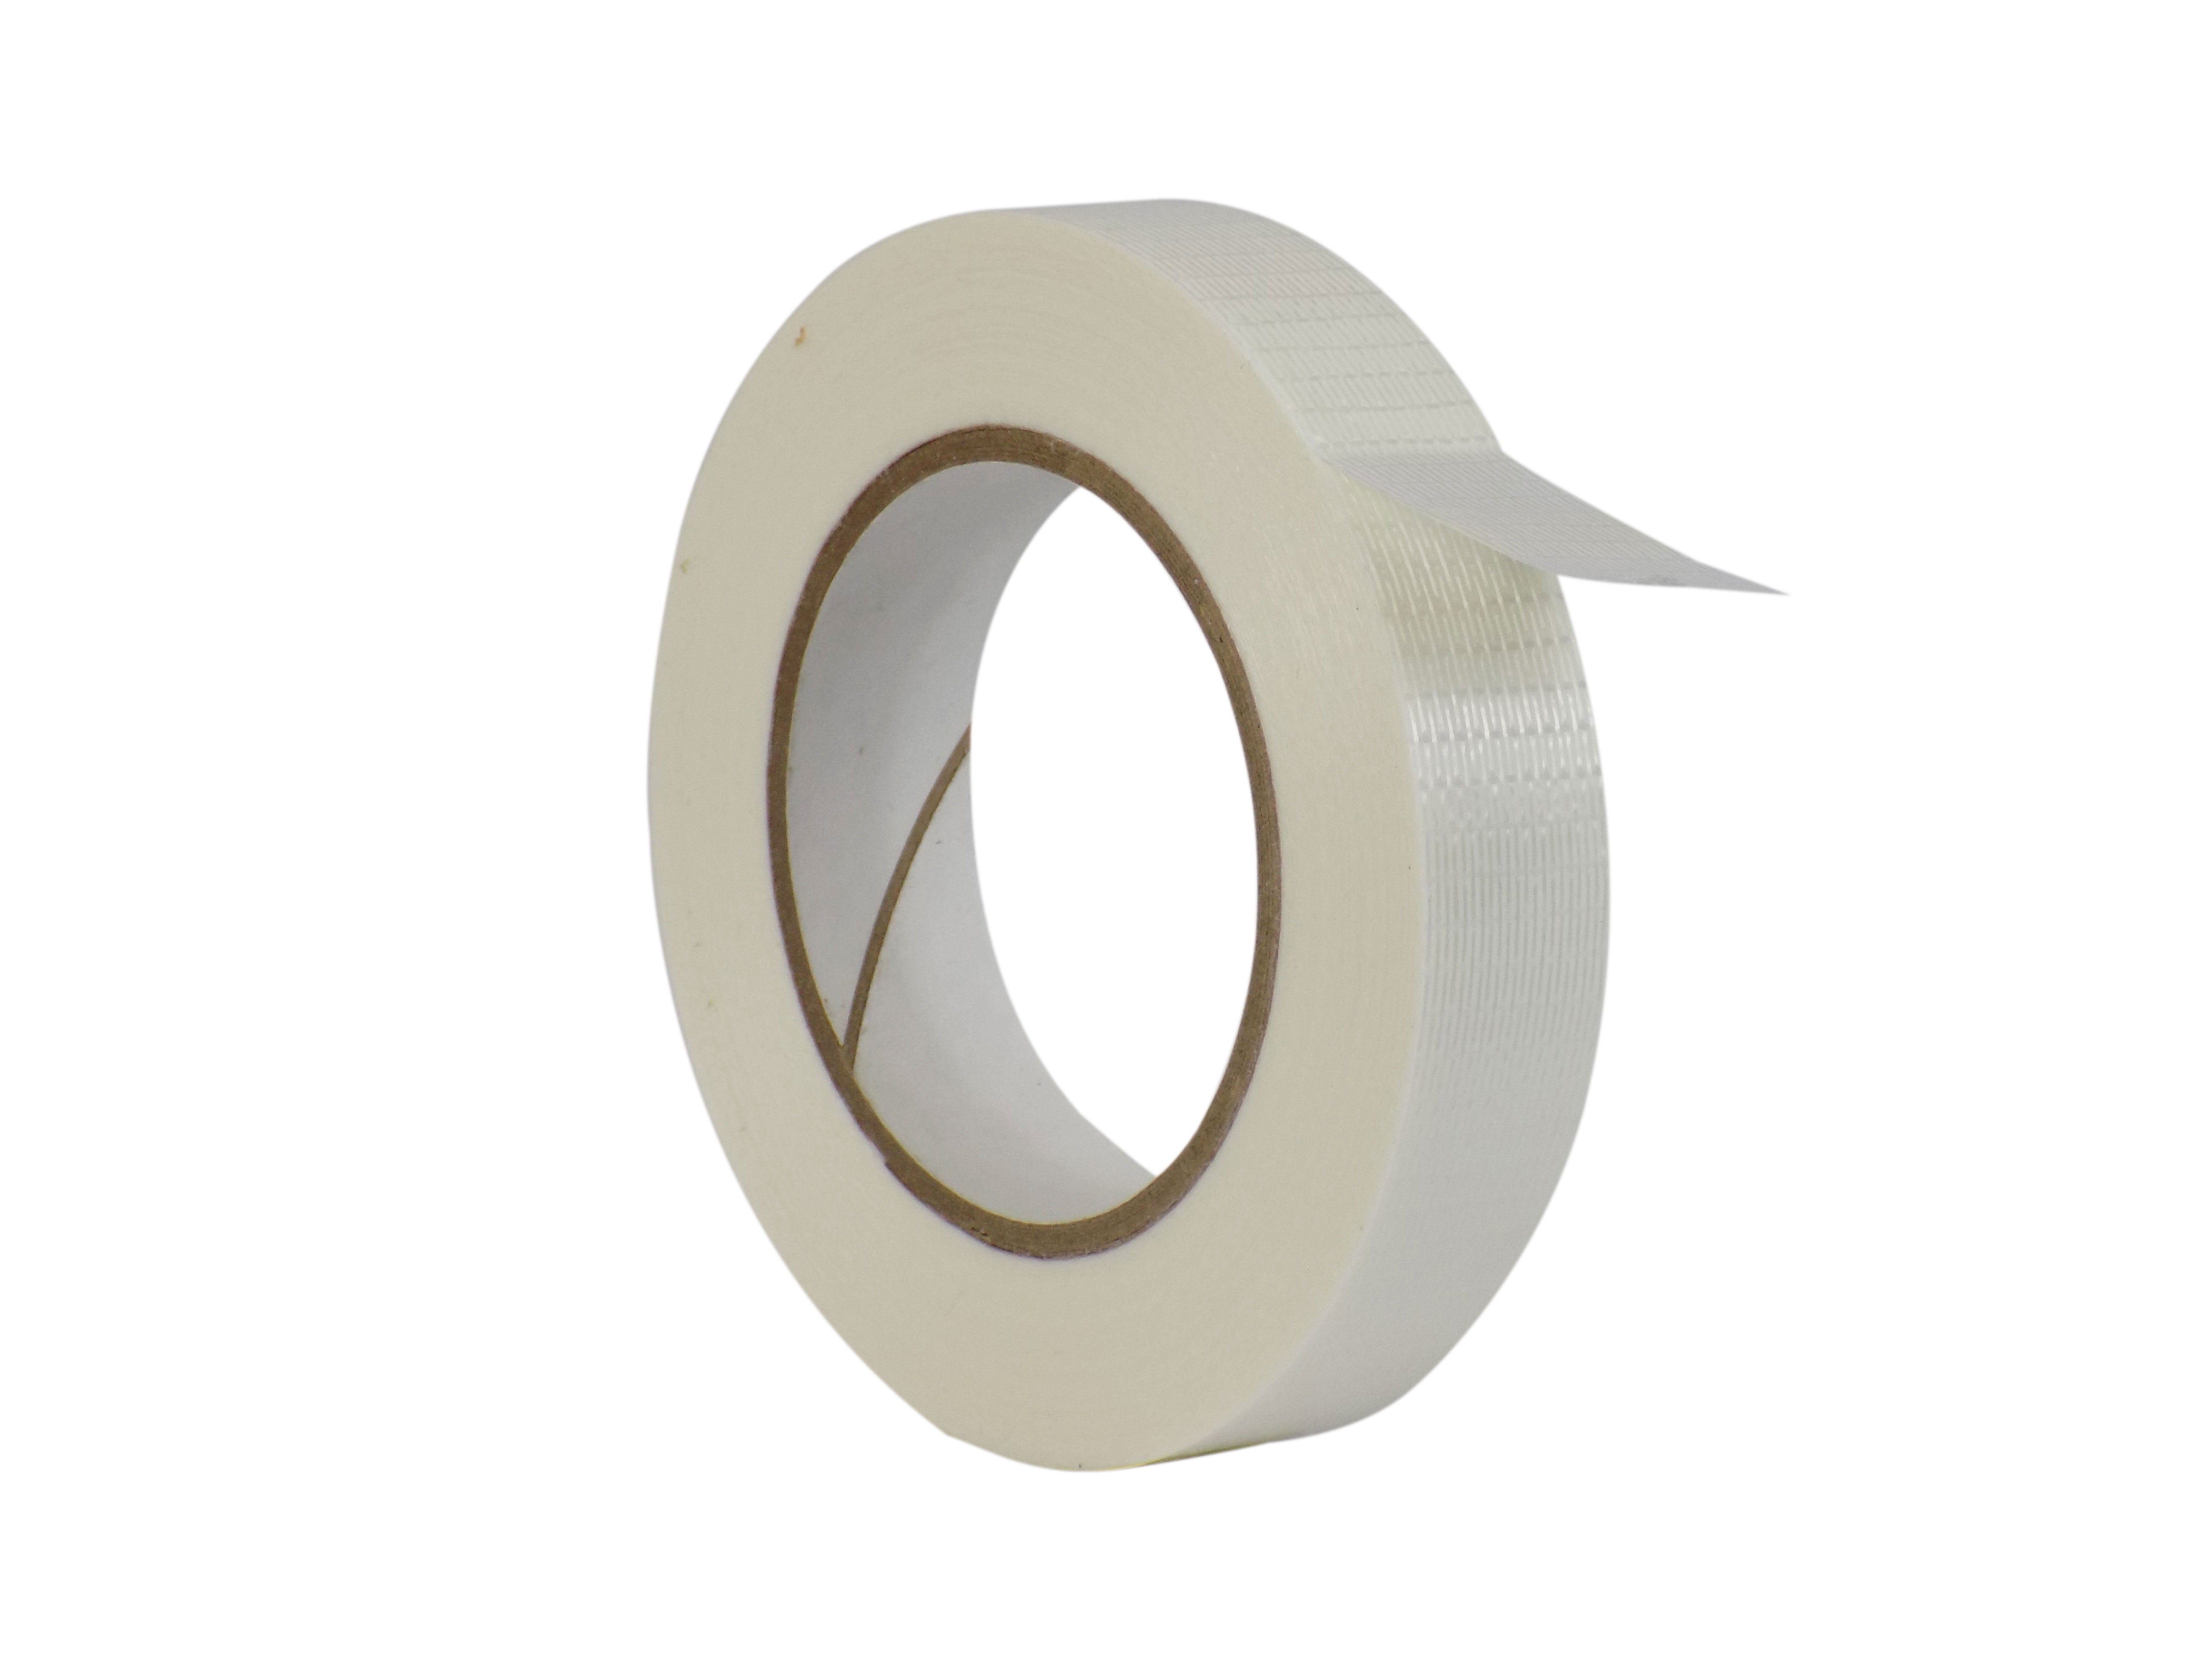 Hexayurt Tape : 7 in x 60 yds. Tear Resistance Available in Multiple Sizes WOD FIL-835B/D Bi-Directional Fiberglass Reinforced Packing Filament Strapping Tape High Adhesion Level Pack of 1 